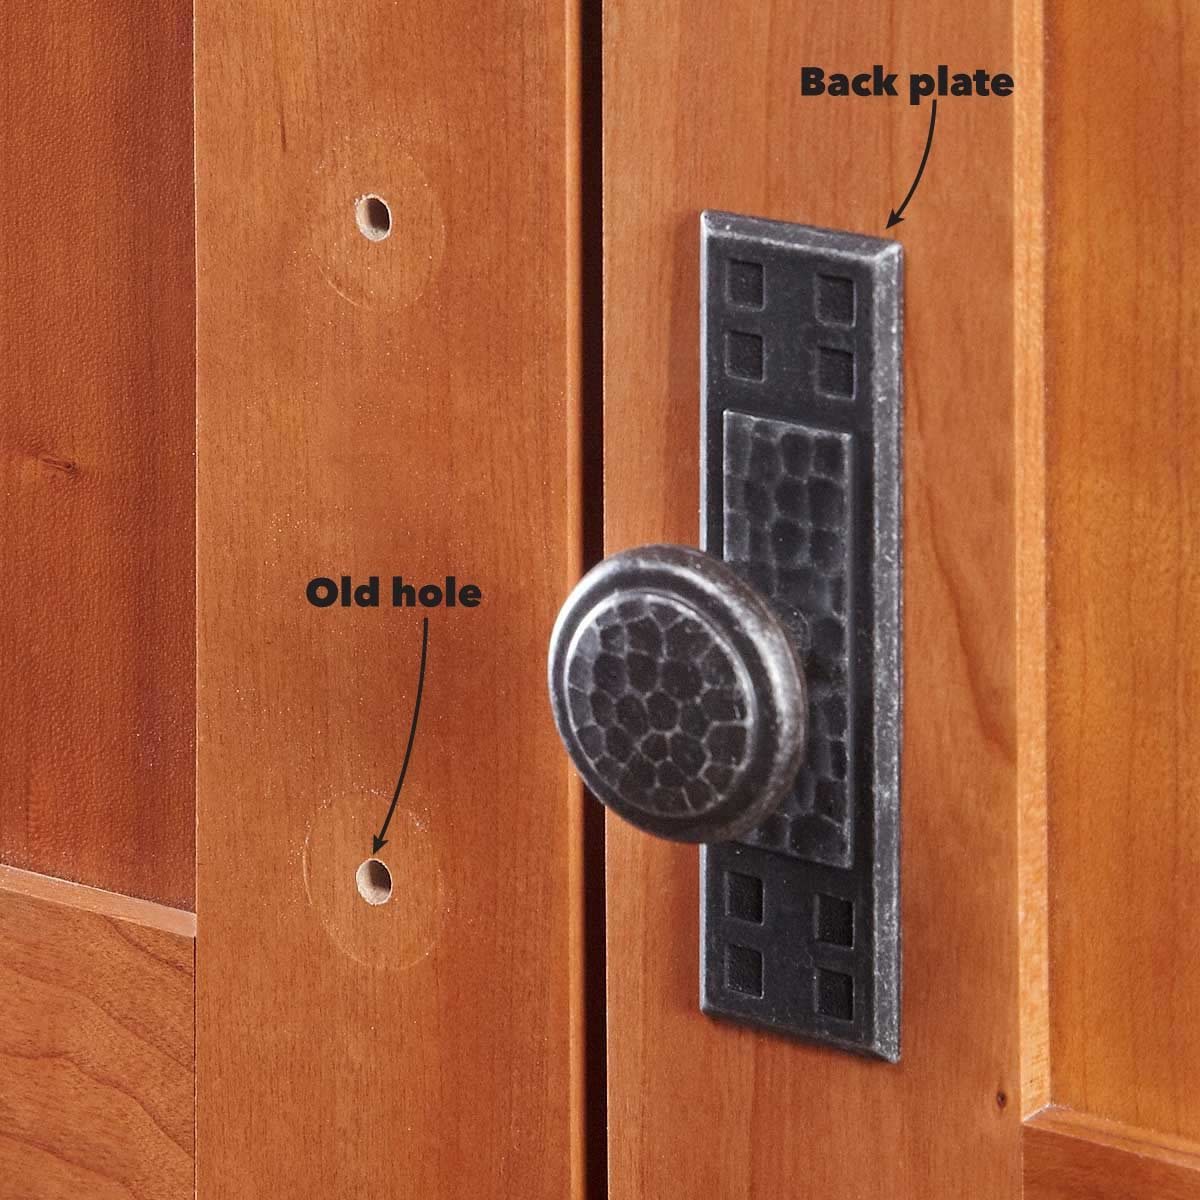 Hide Old Holes With Back Plates